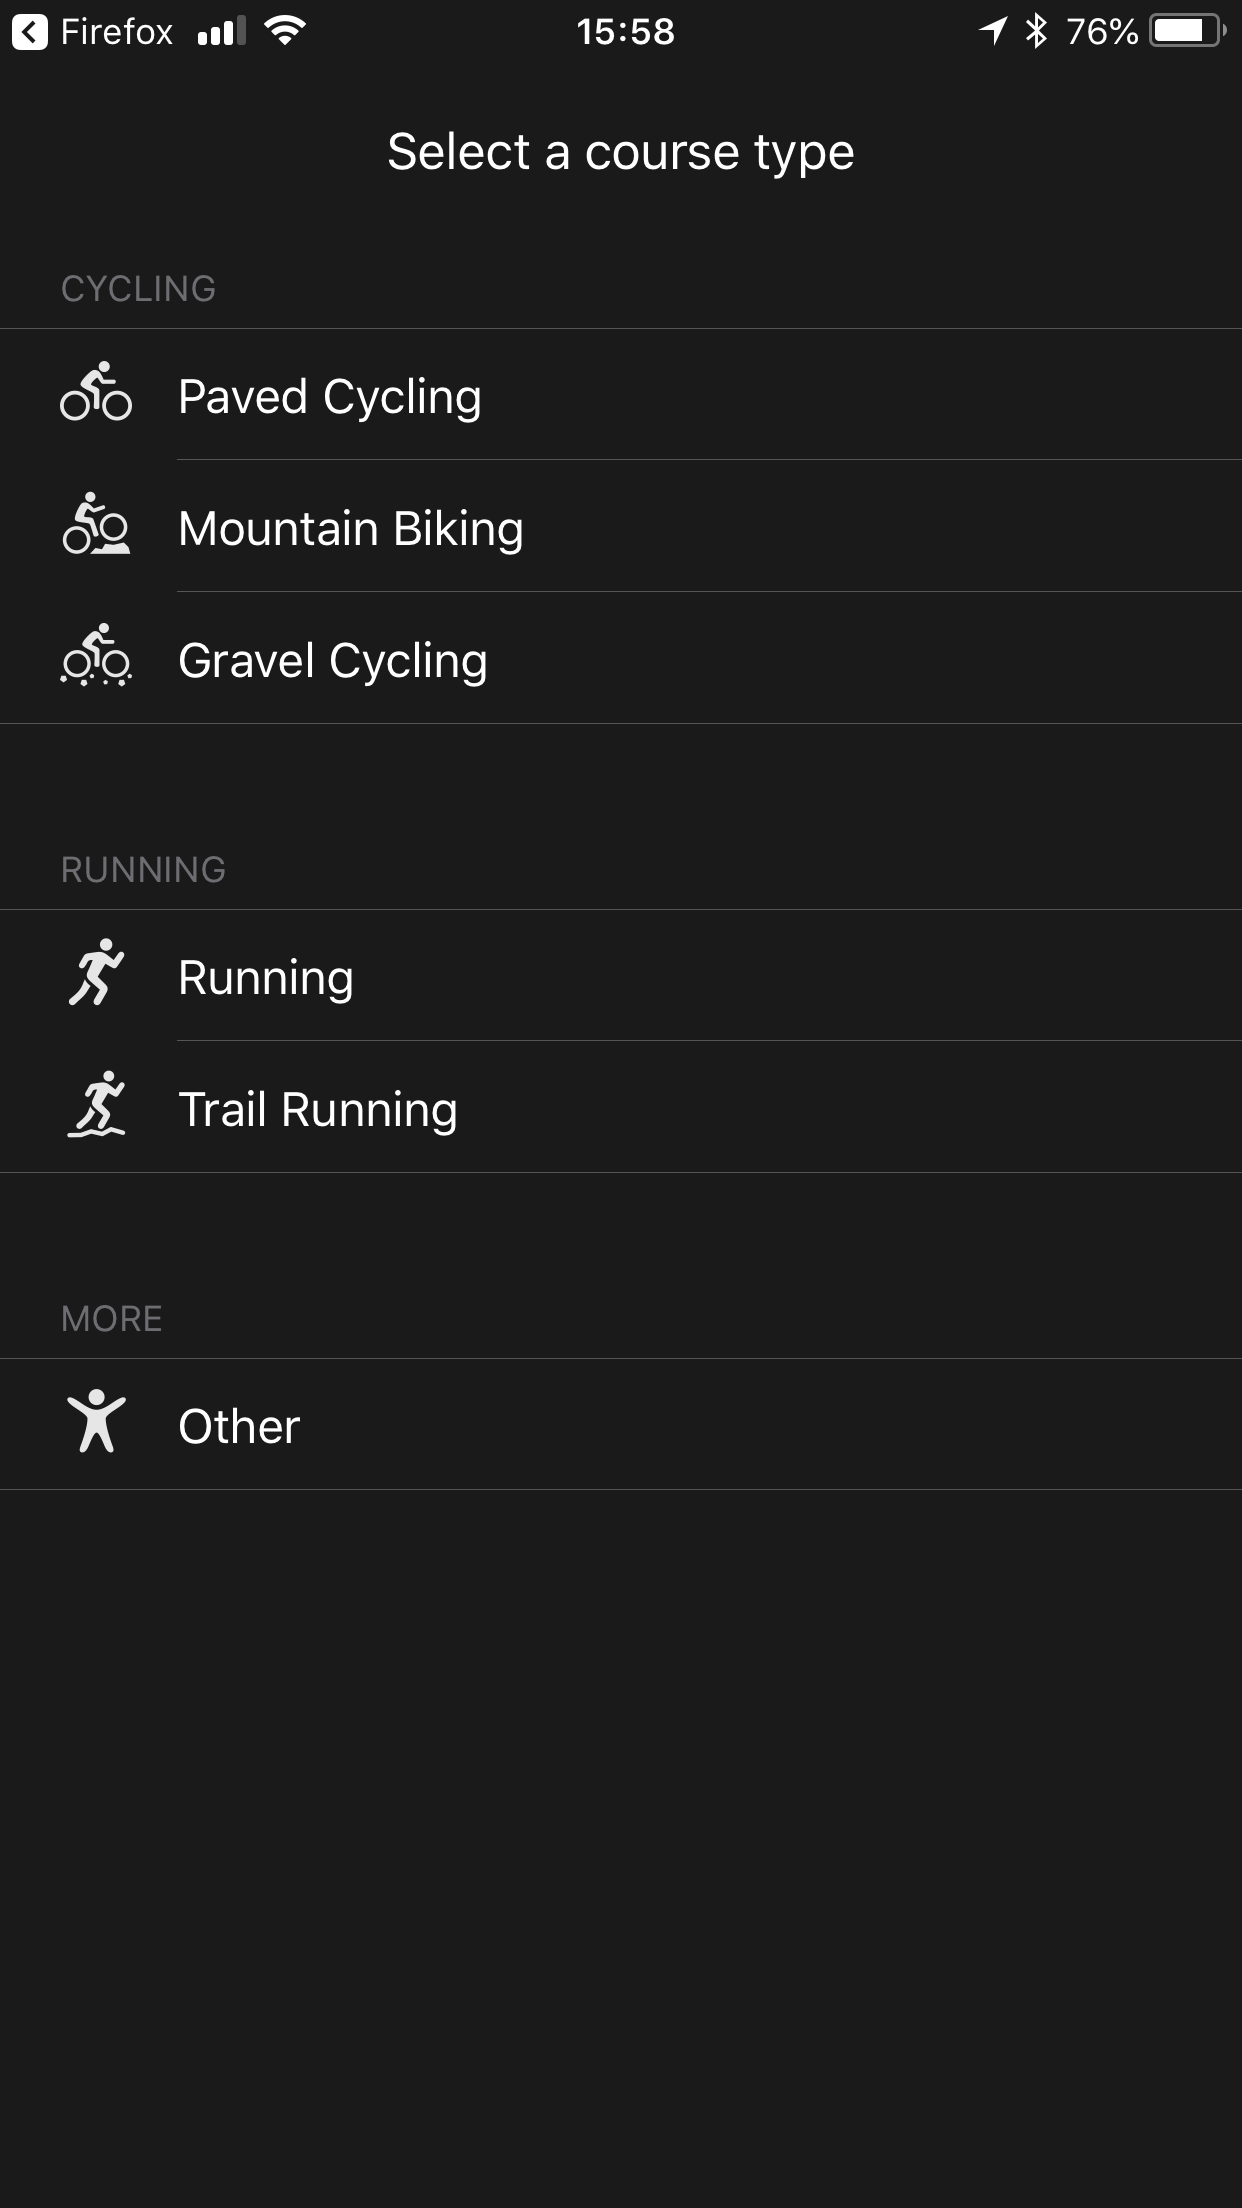 Uploading GPX routes onto the Garmin 820 using an iPhone | by Jon Hume |  Medium